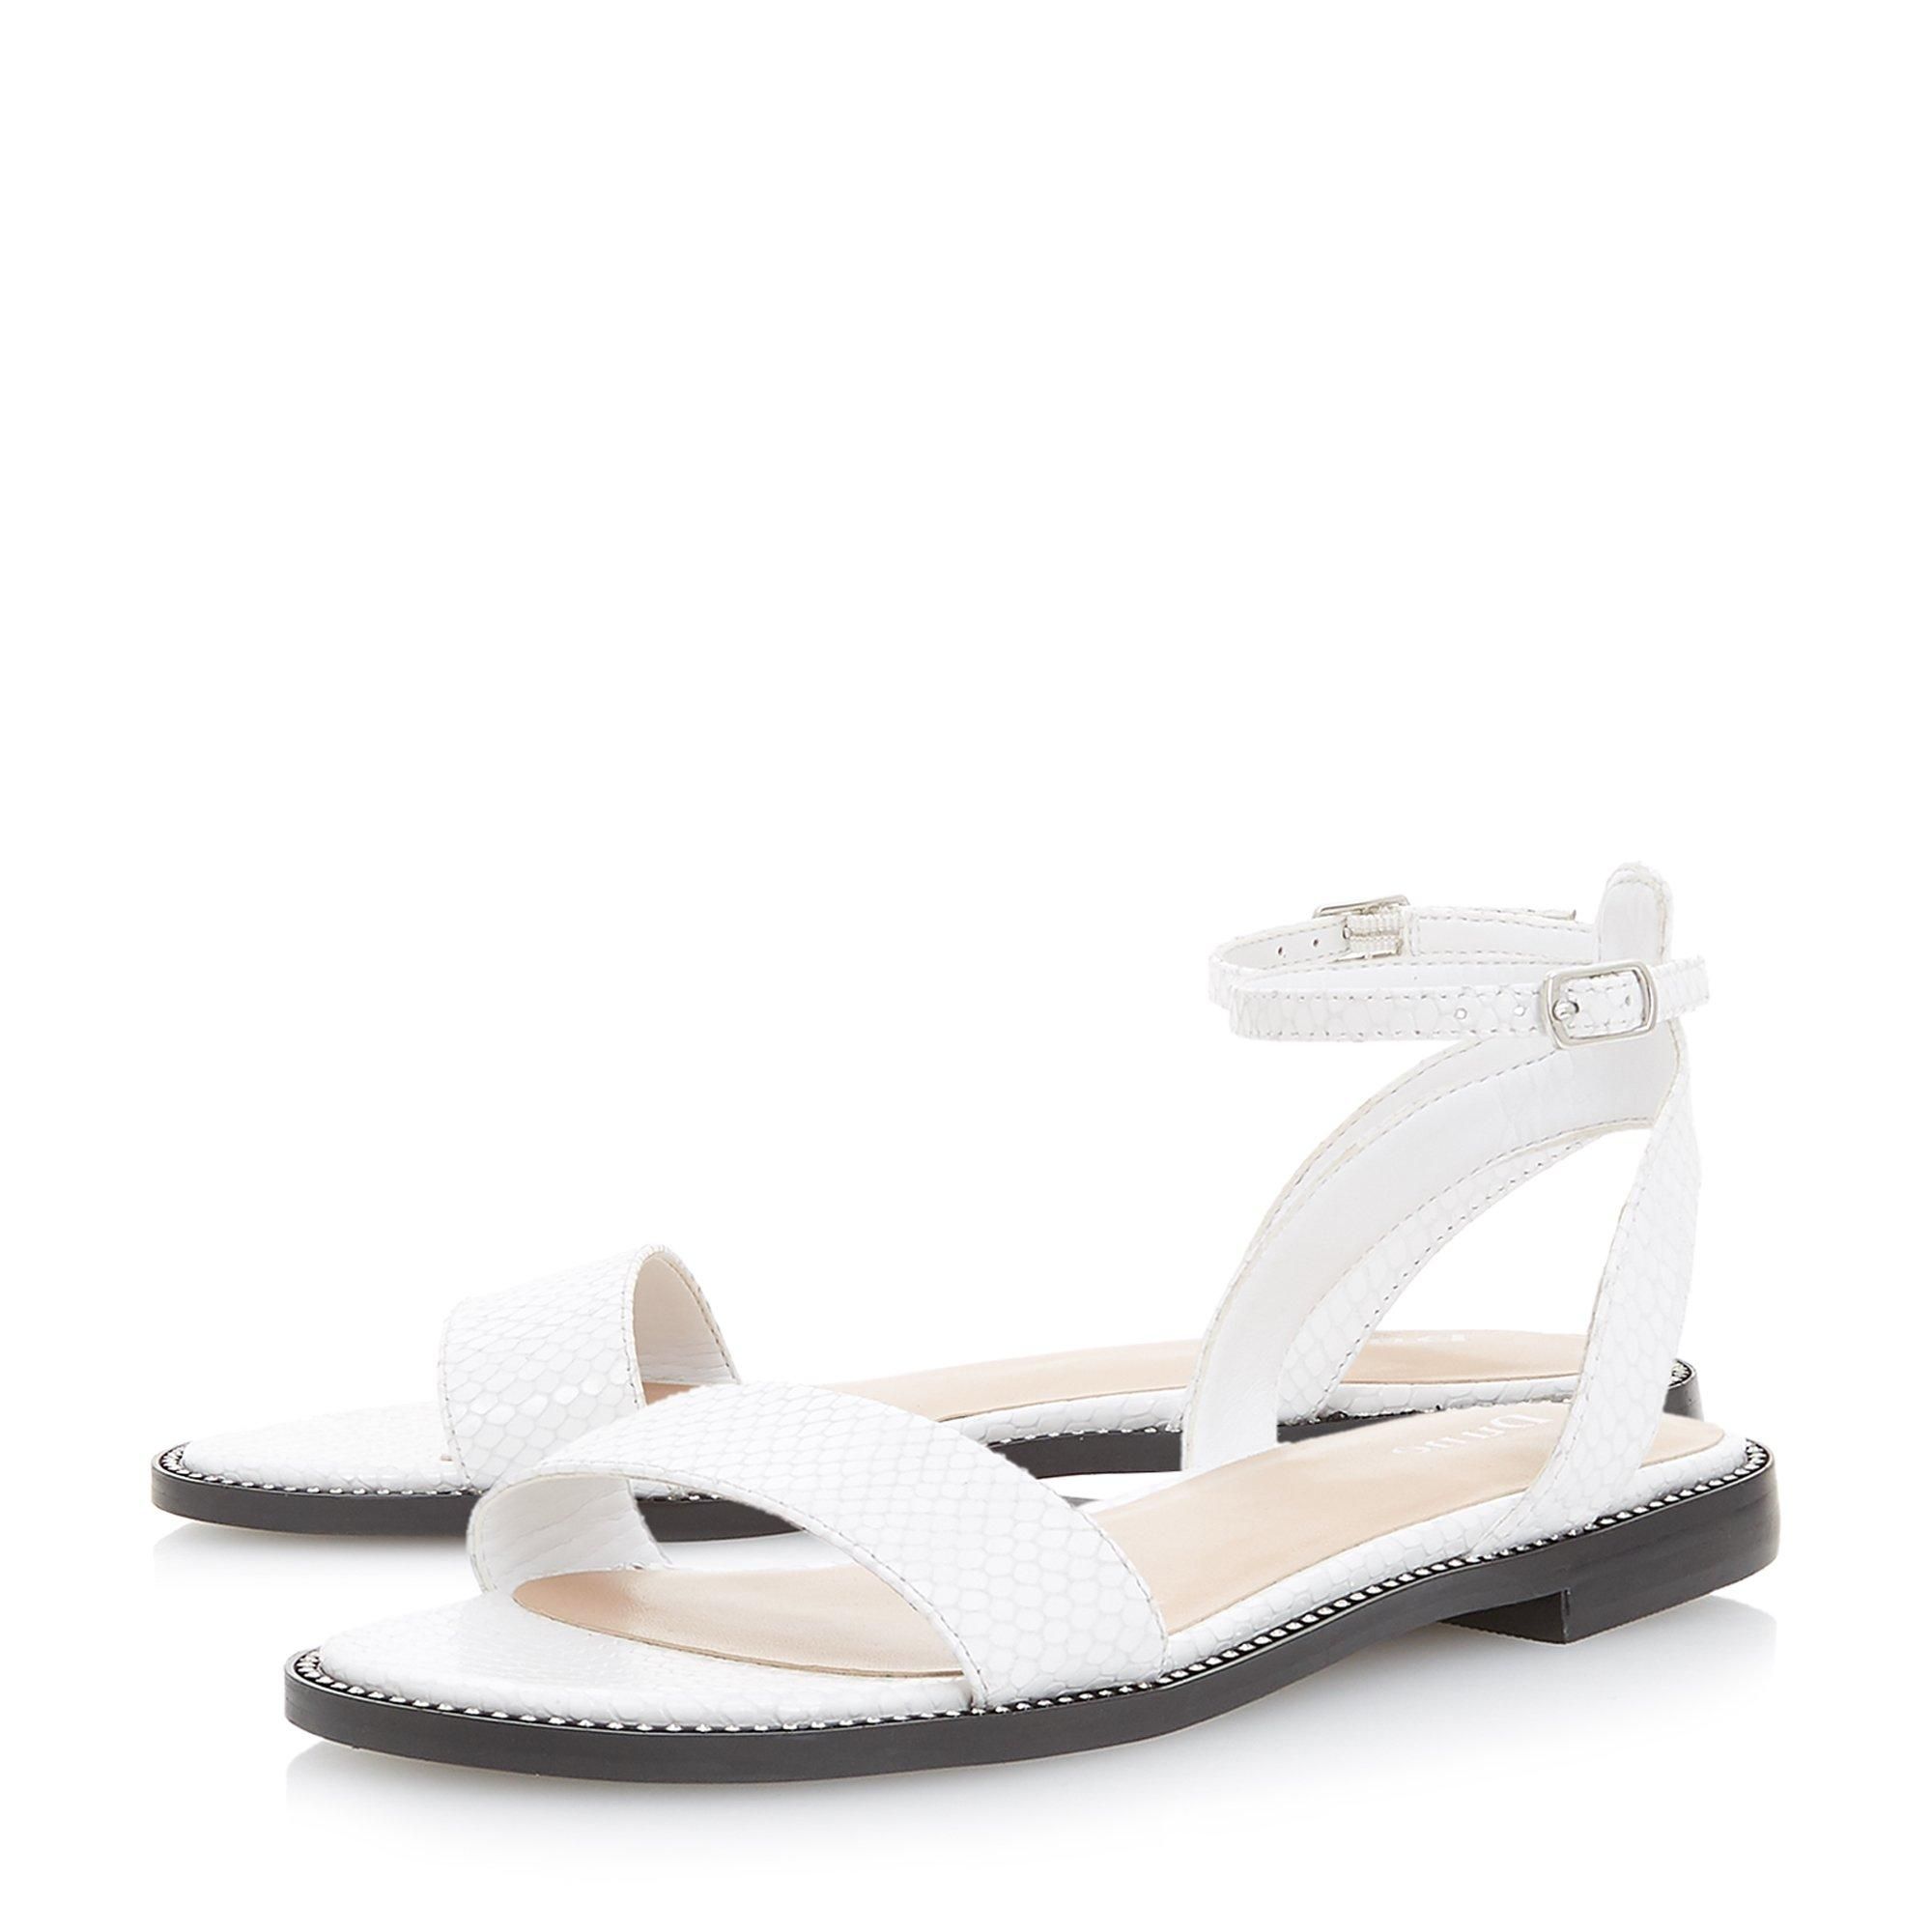 The Dune London Nance two part sandal is a chic summertime style. Featuring a textured slim front strap, an open back and ankle strap. It's perched on a low block heel with an understated studded trim.